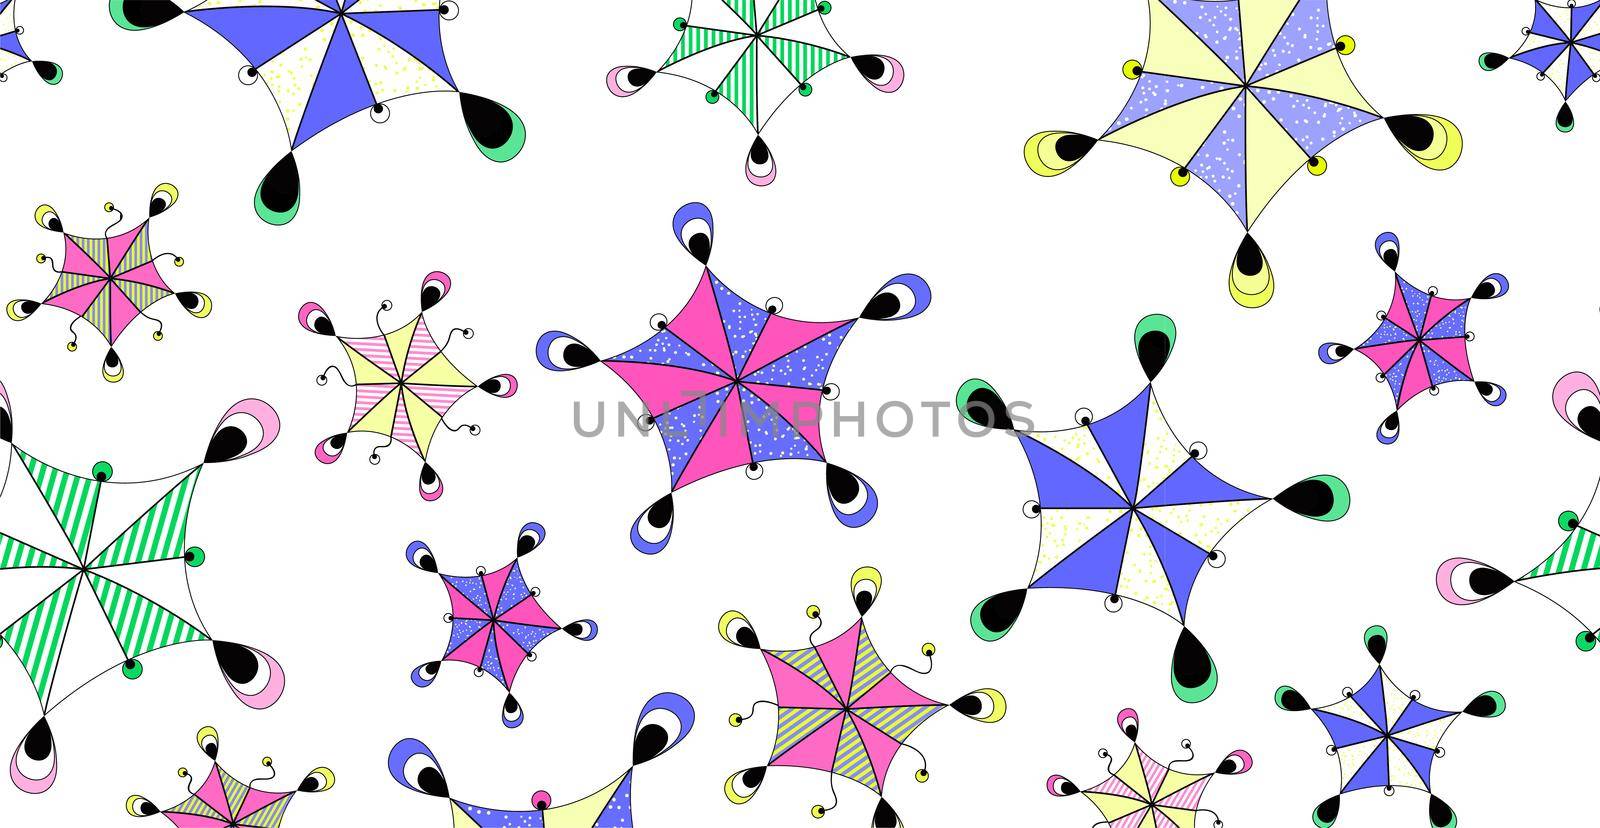 Abstract cartoon doodle background. Funny geometric figures similar to umbrellas. An excellent choice for fabrics, textiles, wallpaper, wrapping paper, etc.